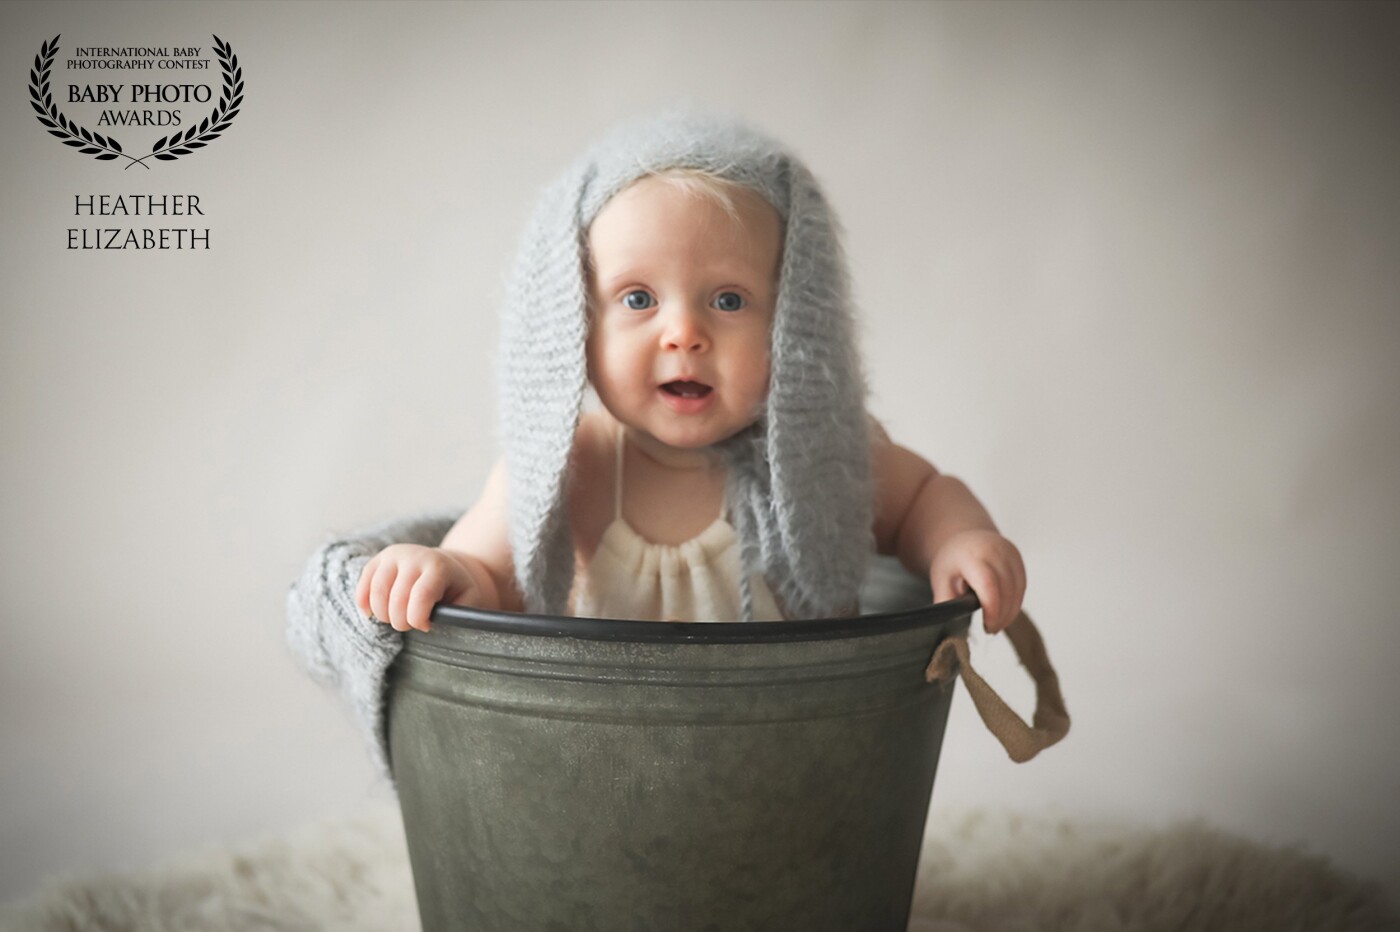 Whats not to love - a bunny in a bucket! <br />
This is the second time I have photographed Alexandra, first time was her newborn shoot. <br />
Sitter sessions are starting to become one of my favorite types of sessions and I love styling these ones. 